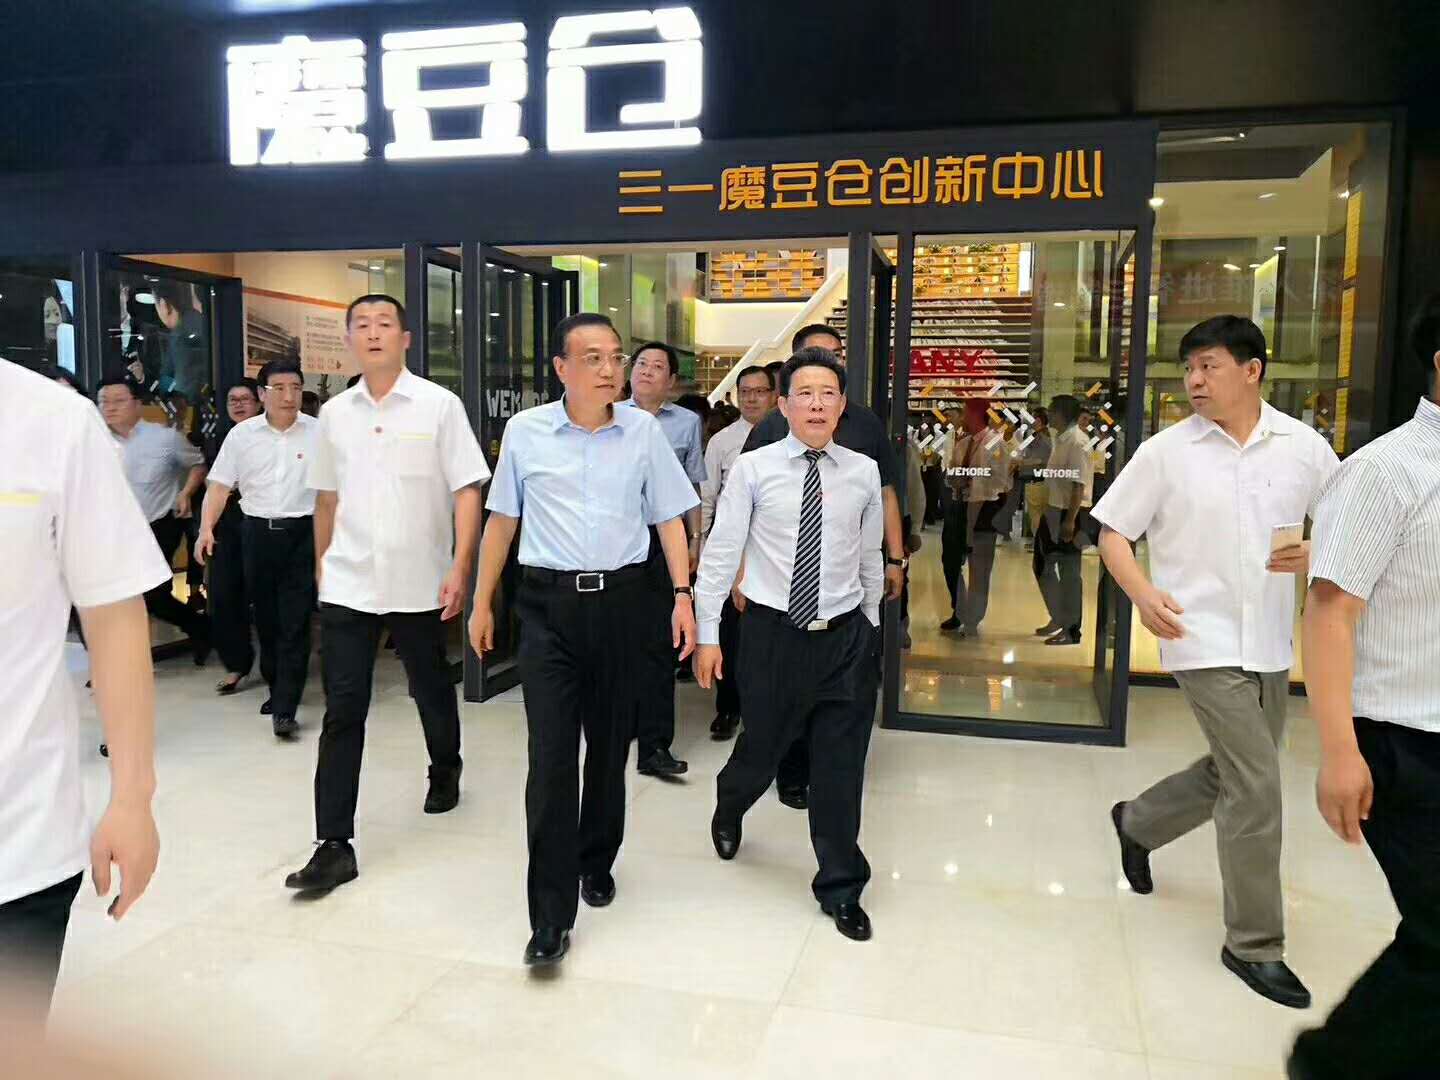 Mr. Keqiang Lee’s visit to CSCERAMIC office building2